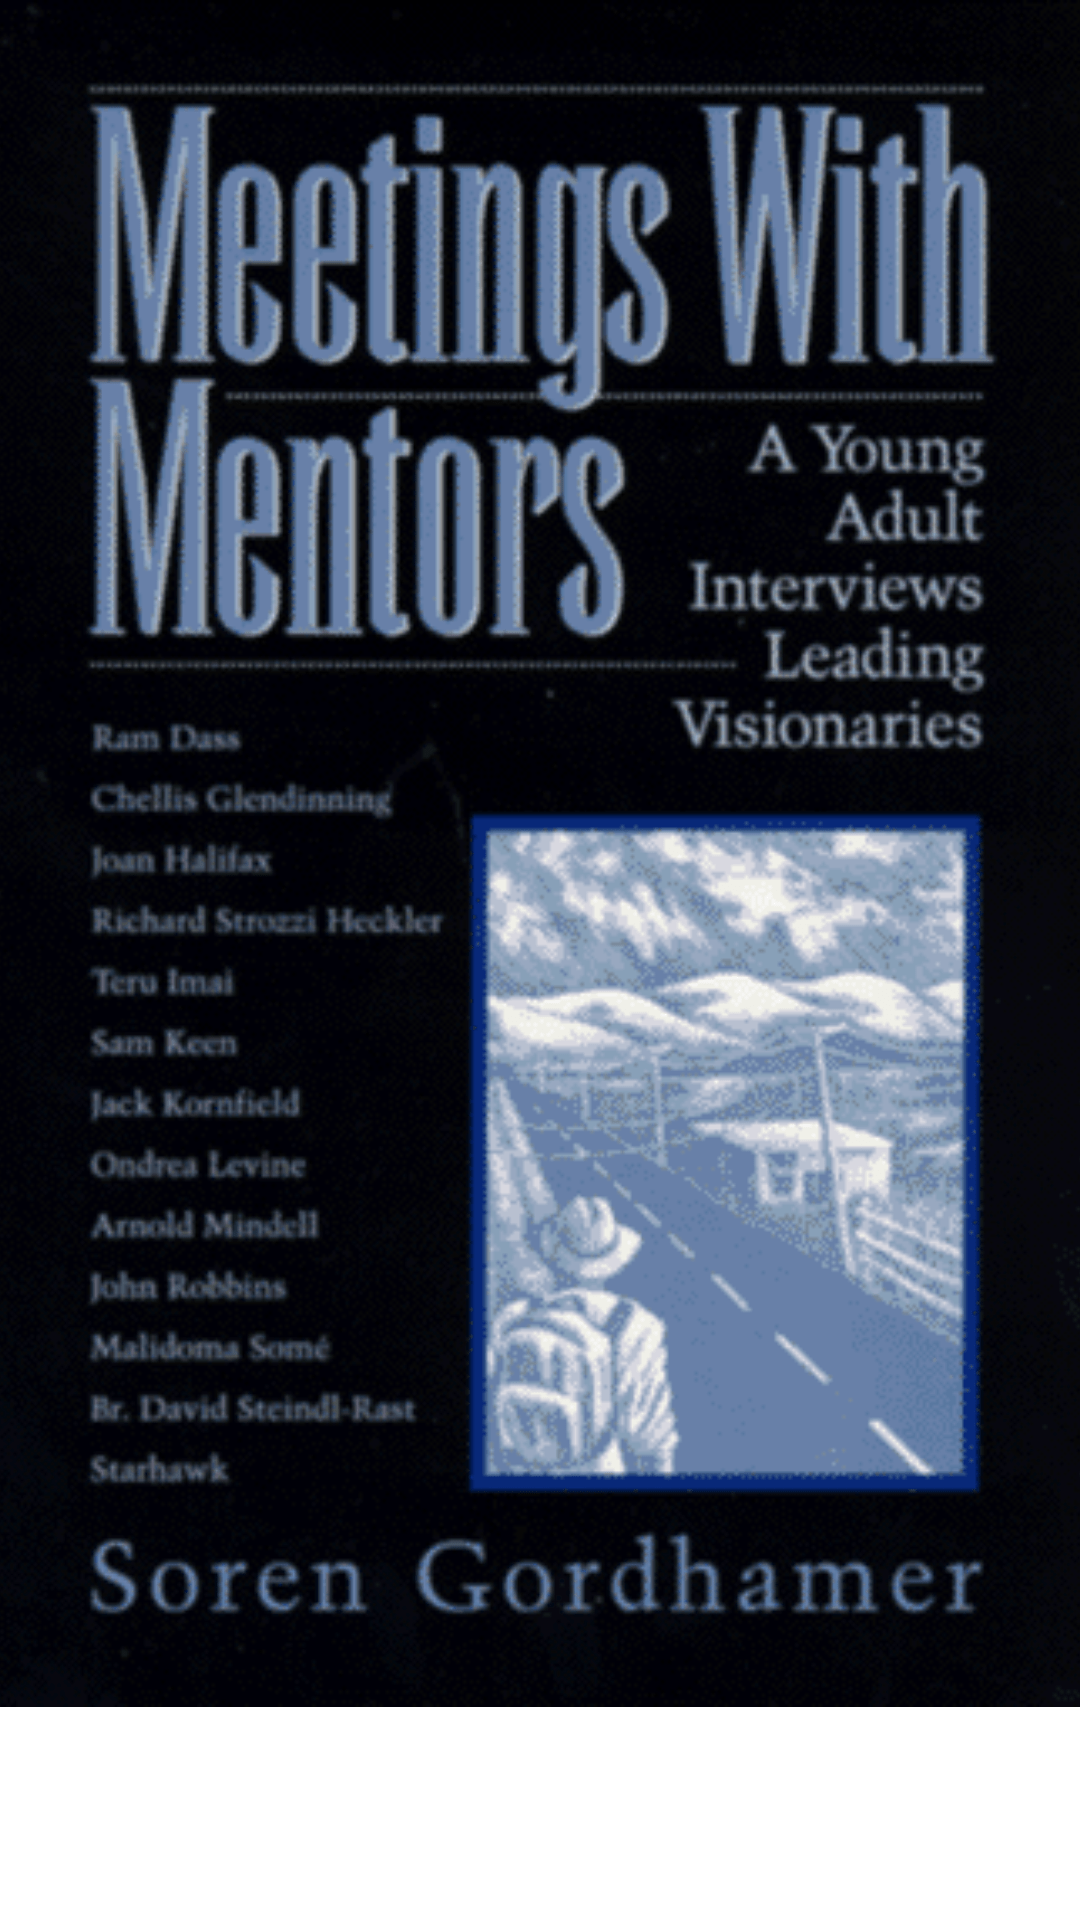 Meetings With Mentors: A Young Adult Interviews Leading Visionaries